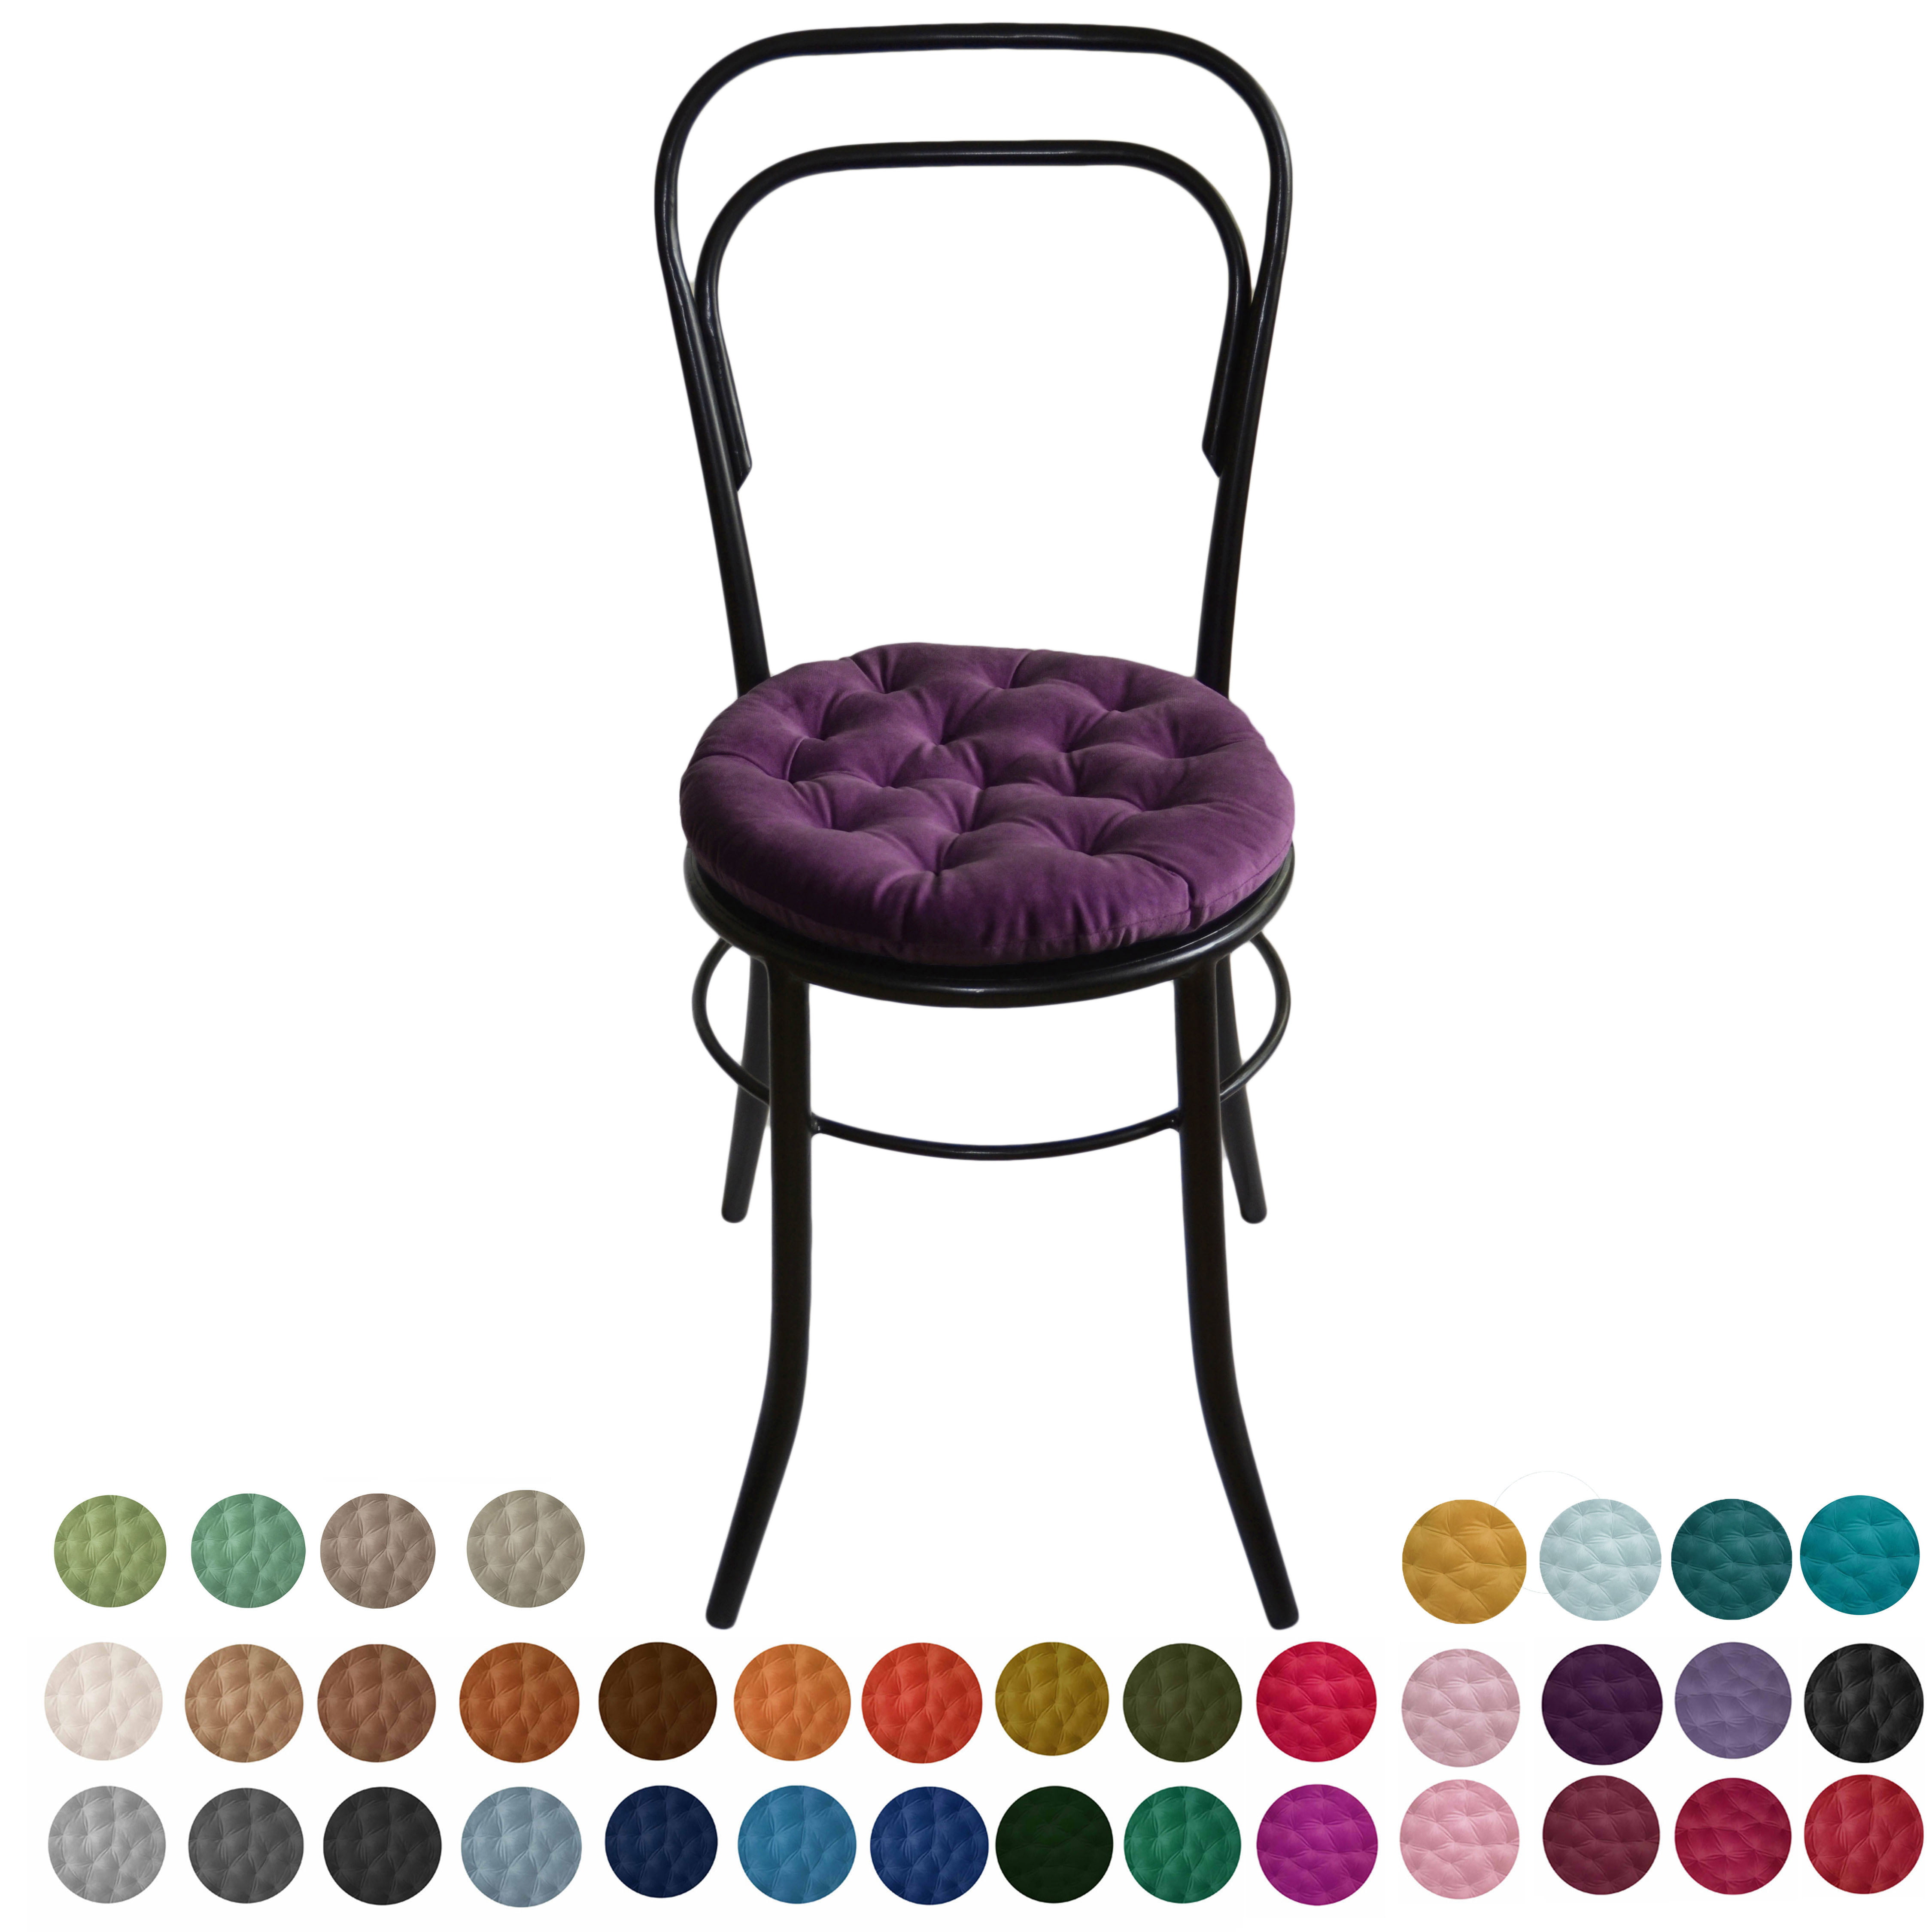 Infinity Collection Purple 16 Square Chair Pad/cushion: Tie Backs  Reversible Tufted Plush for Kitchen Bar Stool Dining Room 